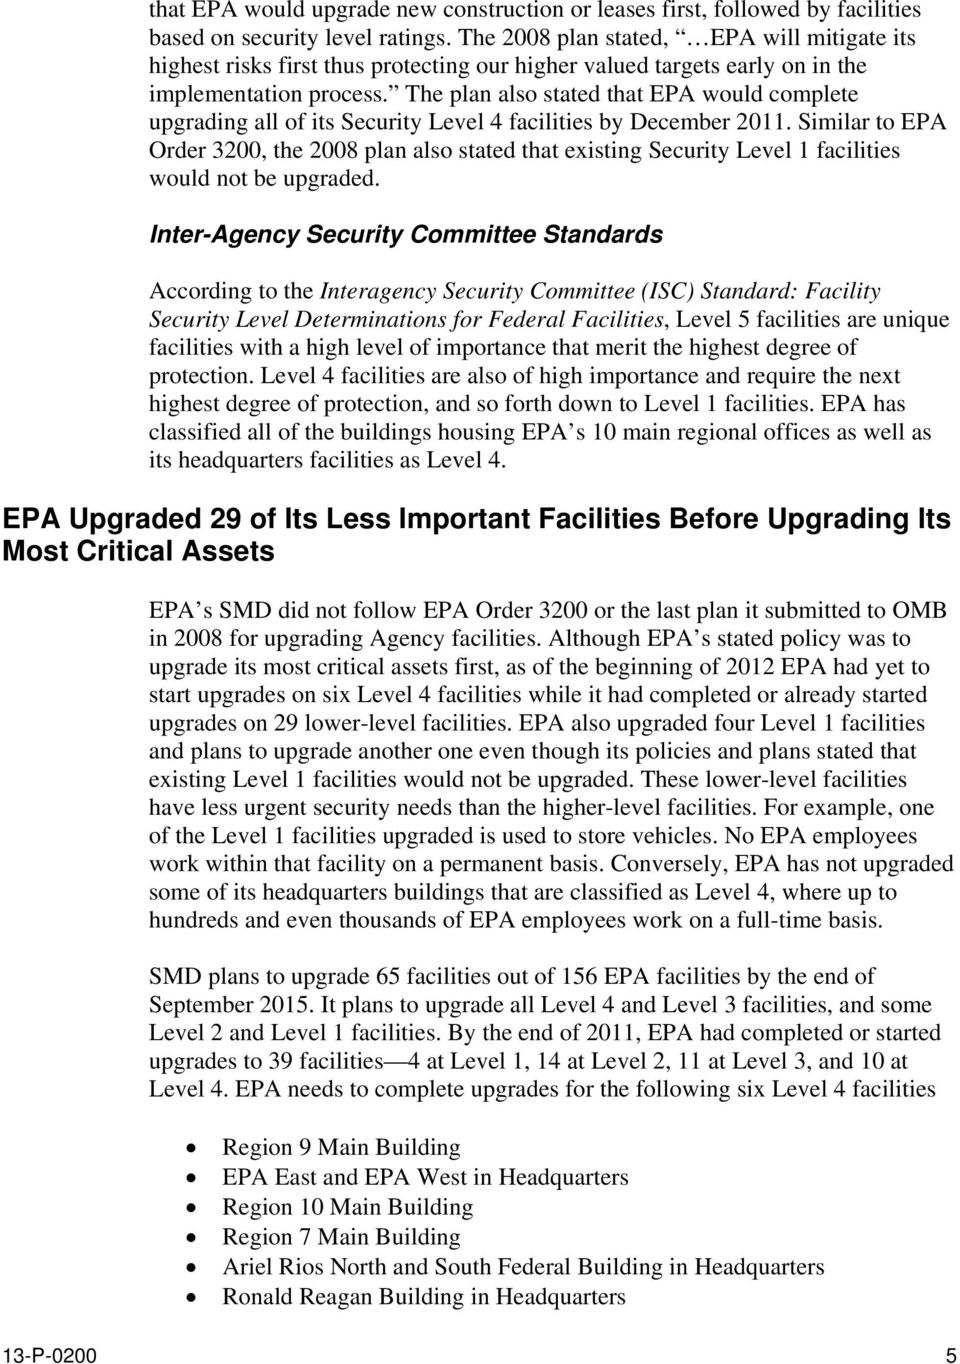 The plan also stated that EPA would complete upgrading all of its Security Level 4 facilities by December 2011.